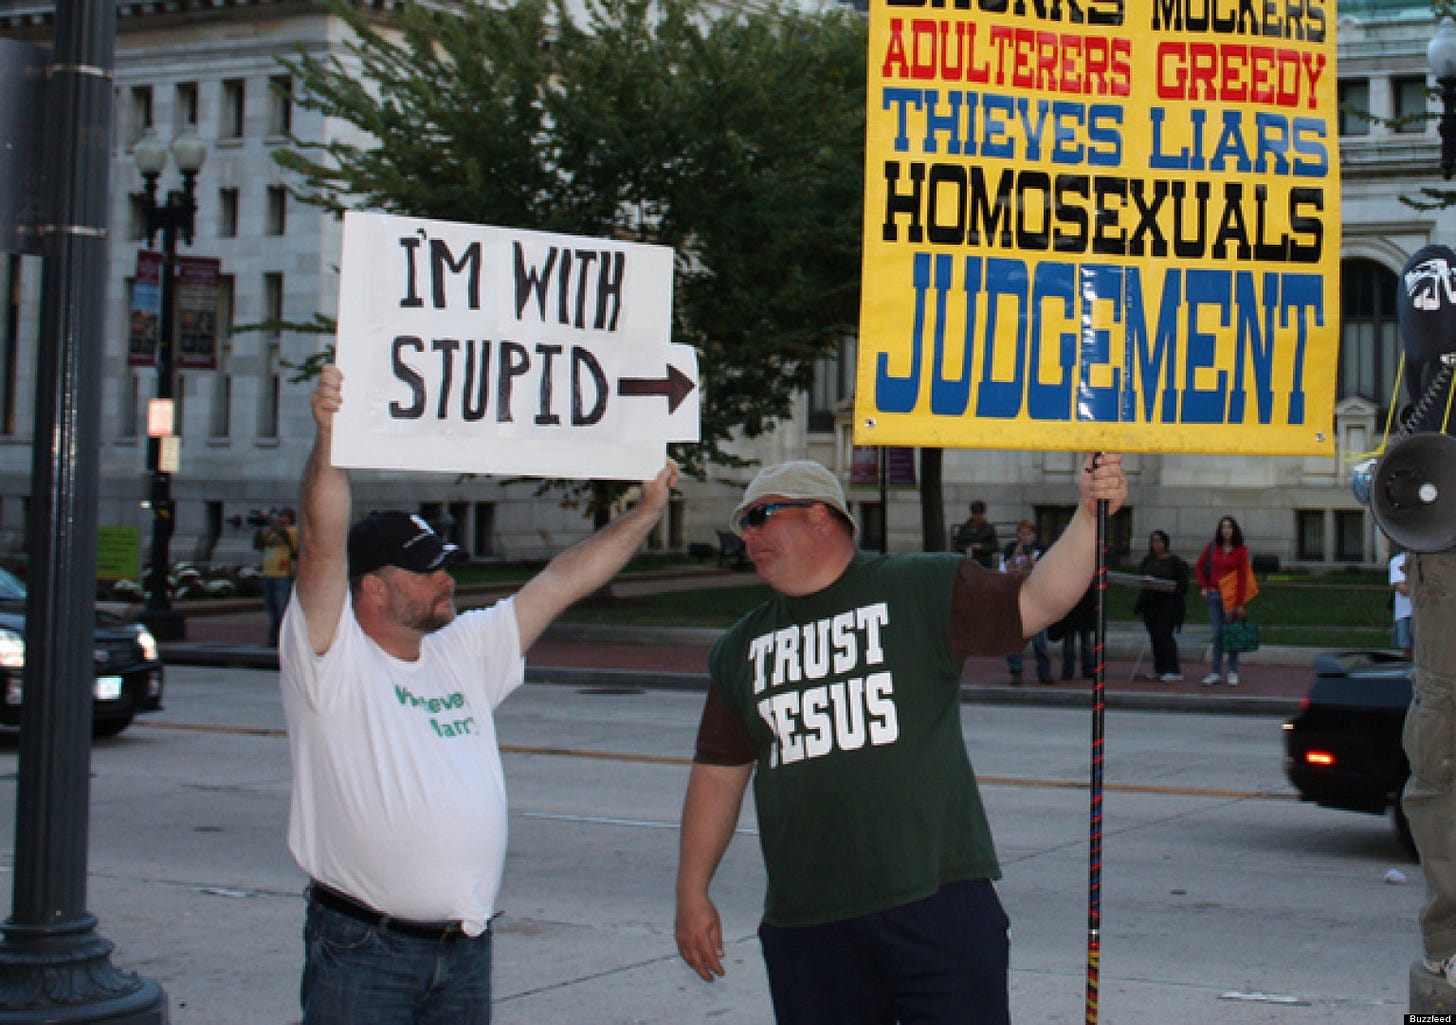 The Best 'I'm With Stupid' Sign Ever (PICTURE) | HuffPost